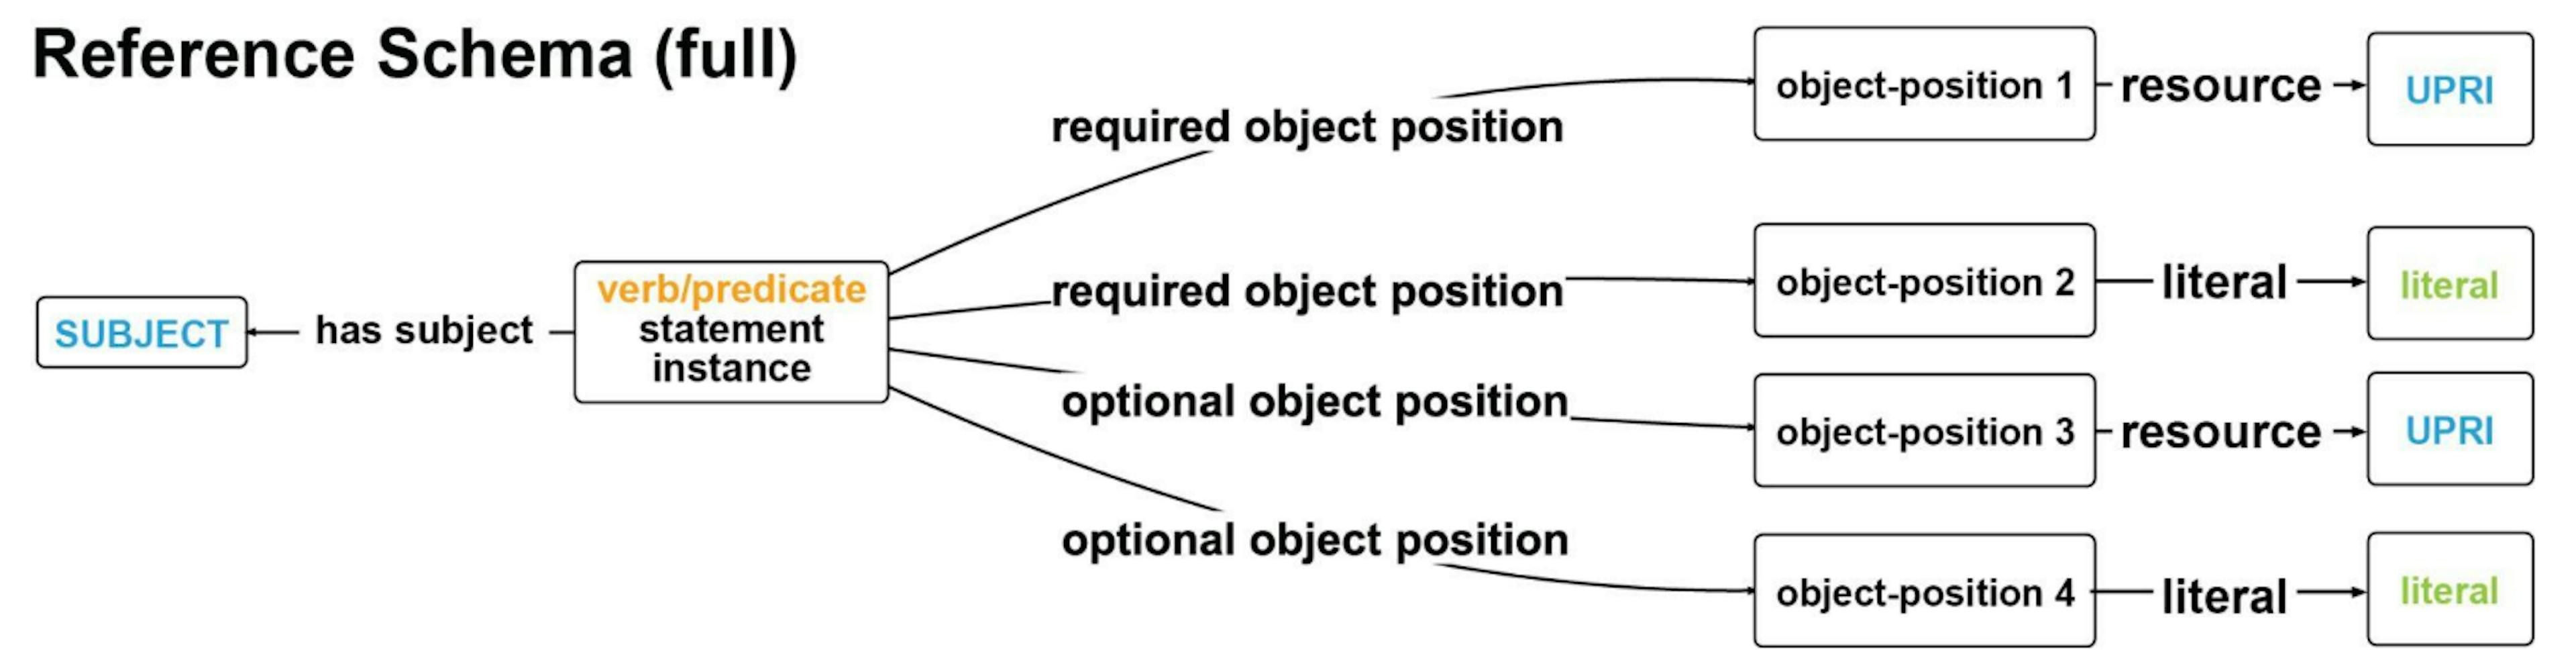 Figure 7: Structure of a reference schema following the full version of the Rosetta approach. The reference schema for thestatement from Figure 6 A), following the modeling paradigm of the full version of the Rosetta approach. Compared to the